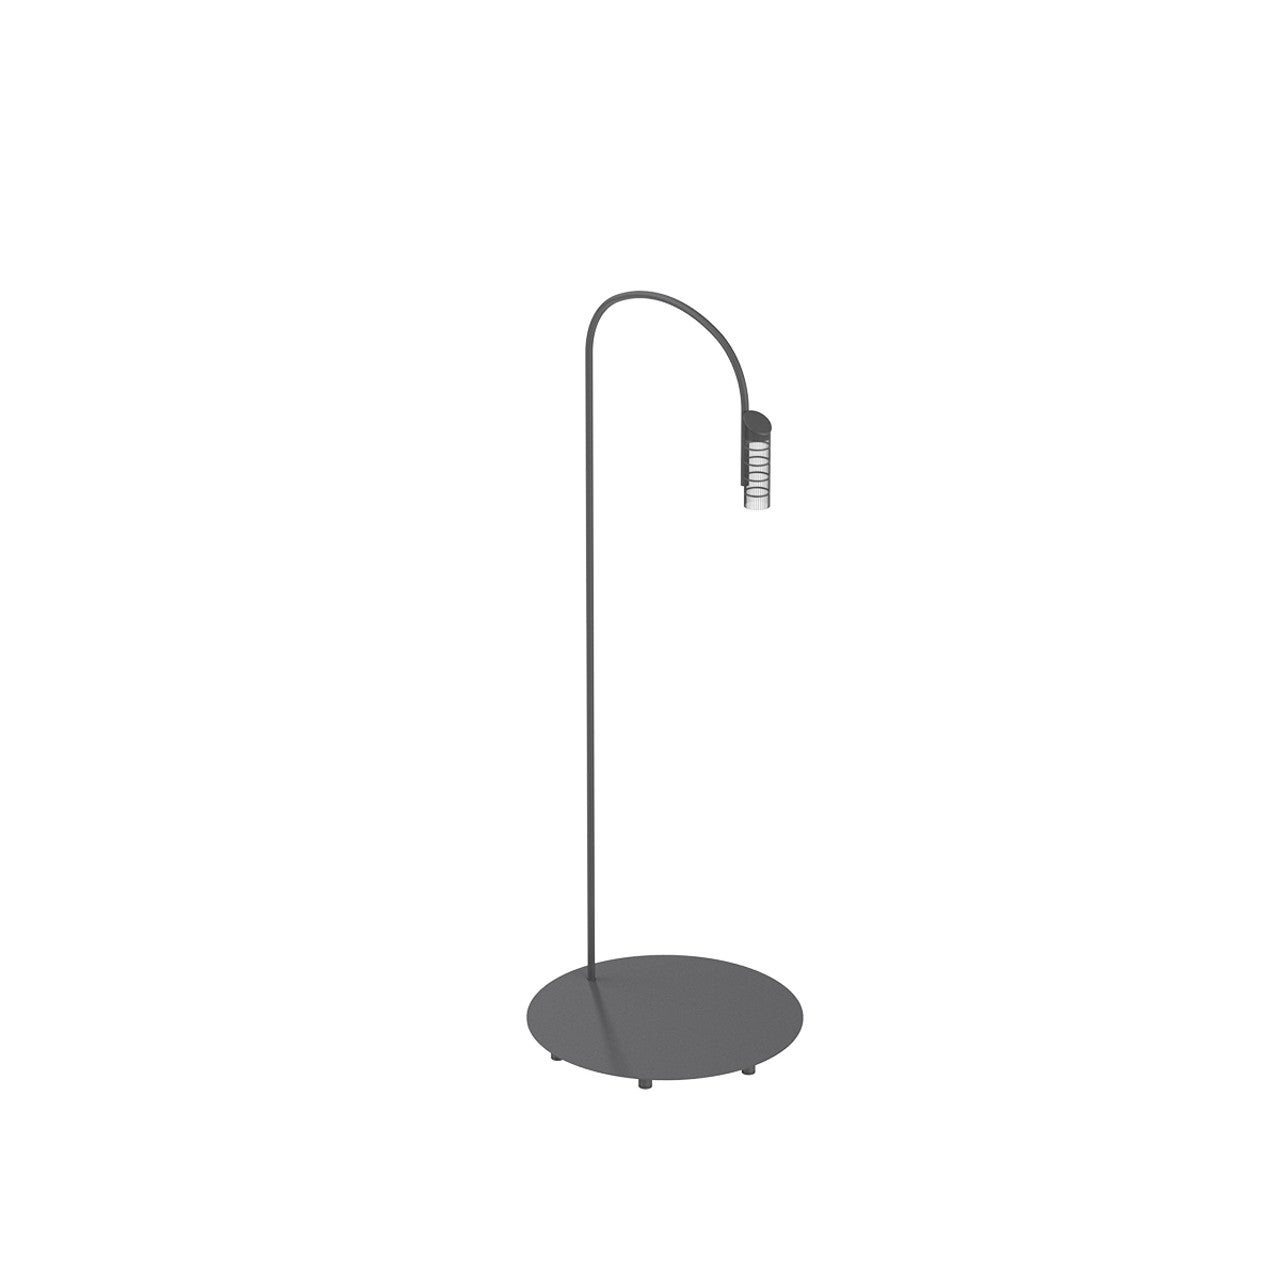 Flos Caule 3000K Model 3 Outdoor Floor Lamp in Anthracite with Nest Shade For Sale